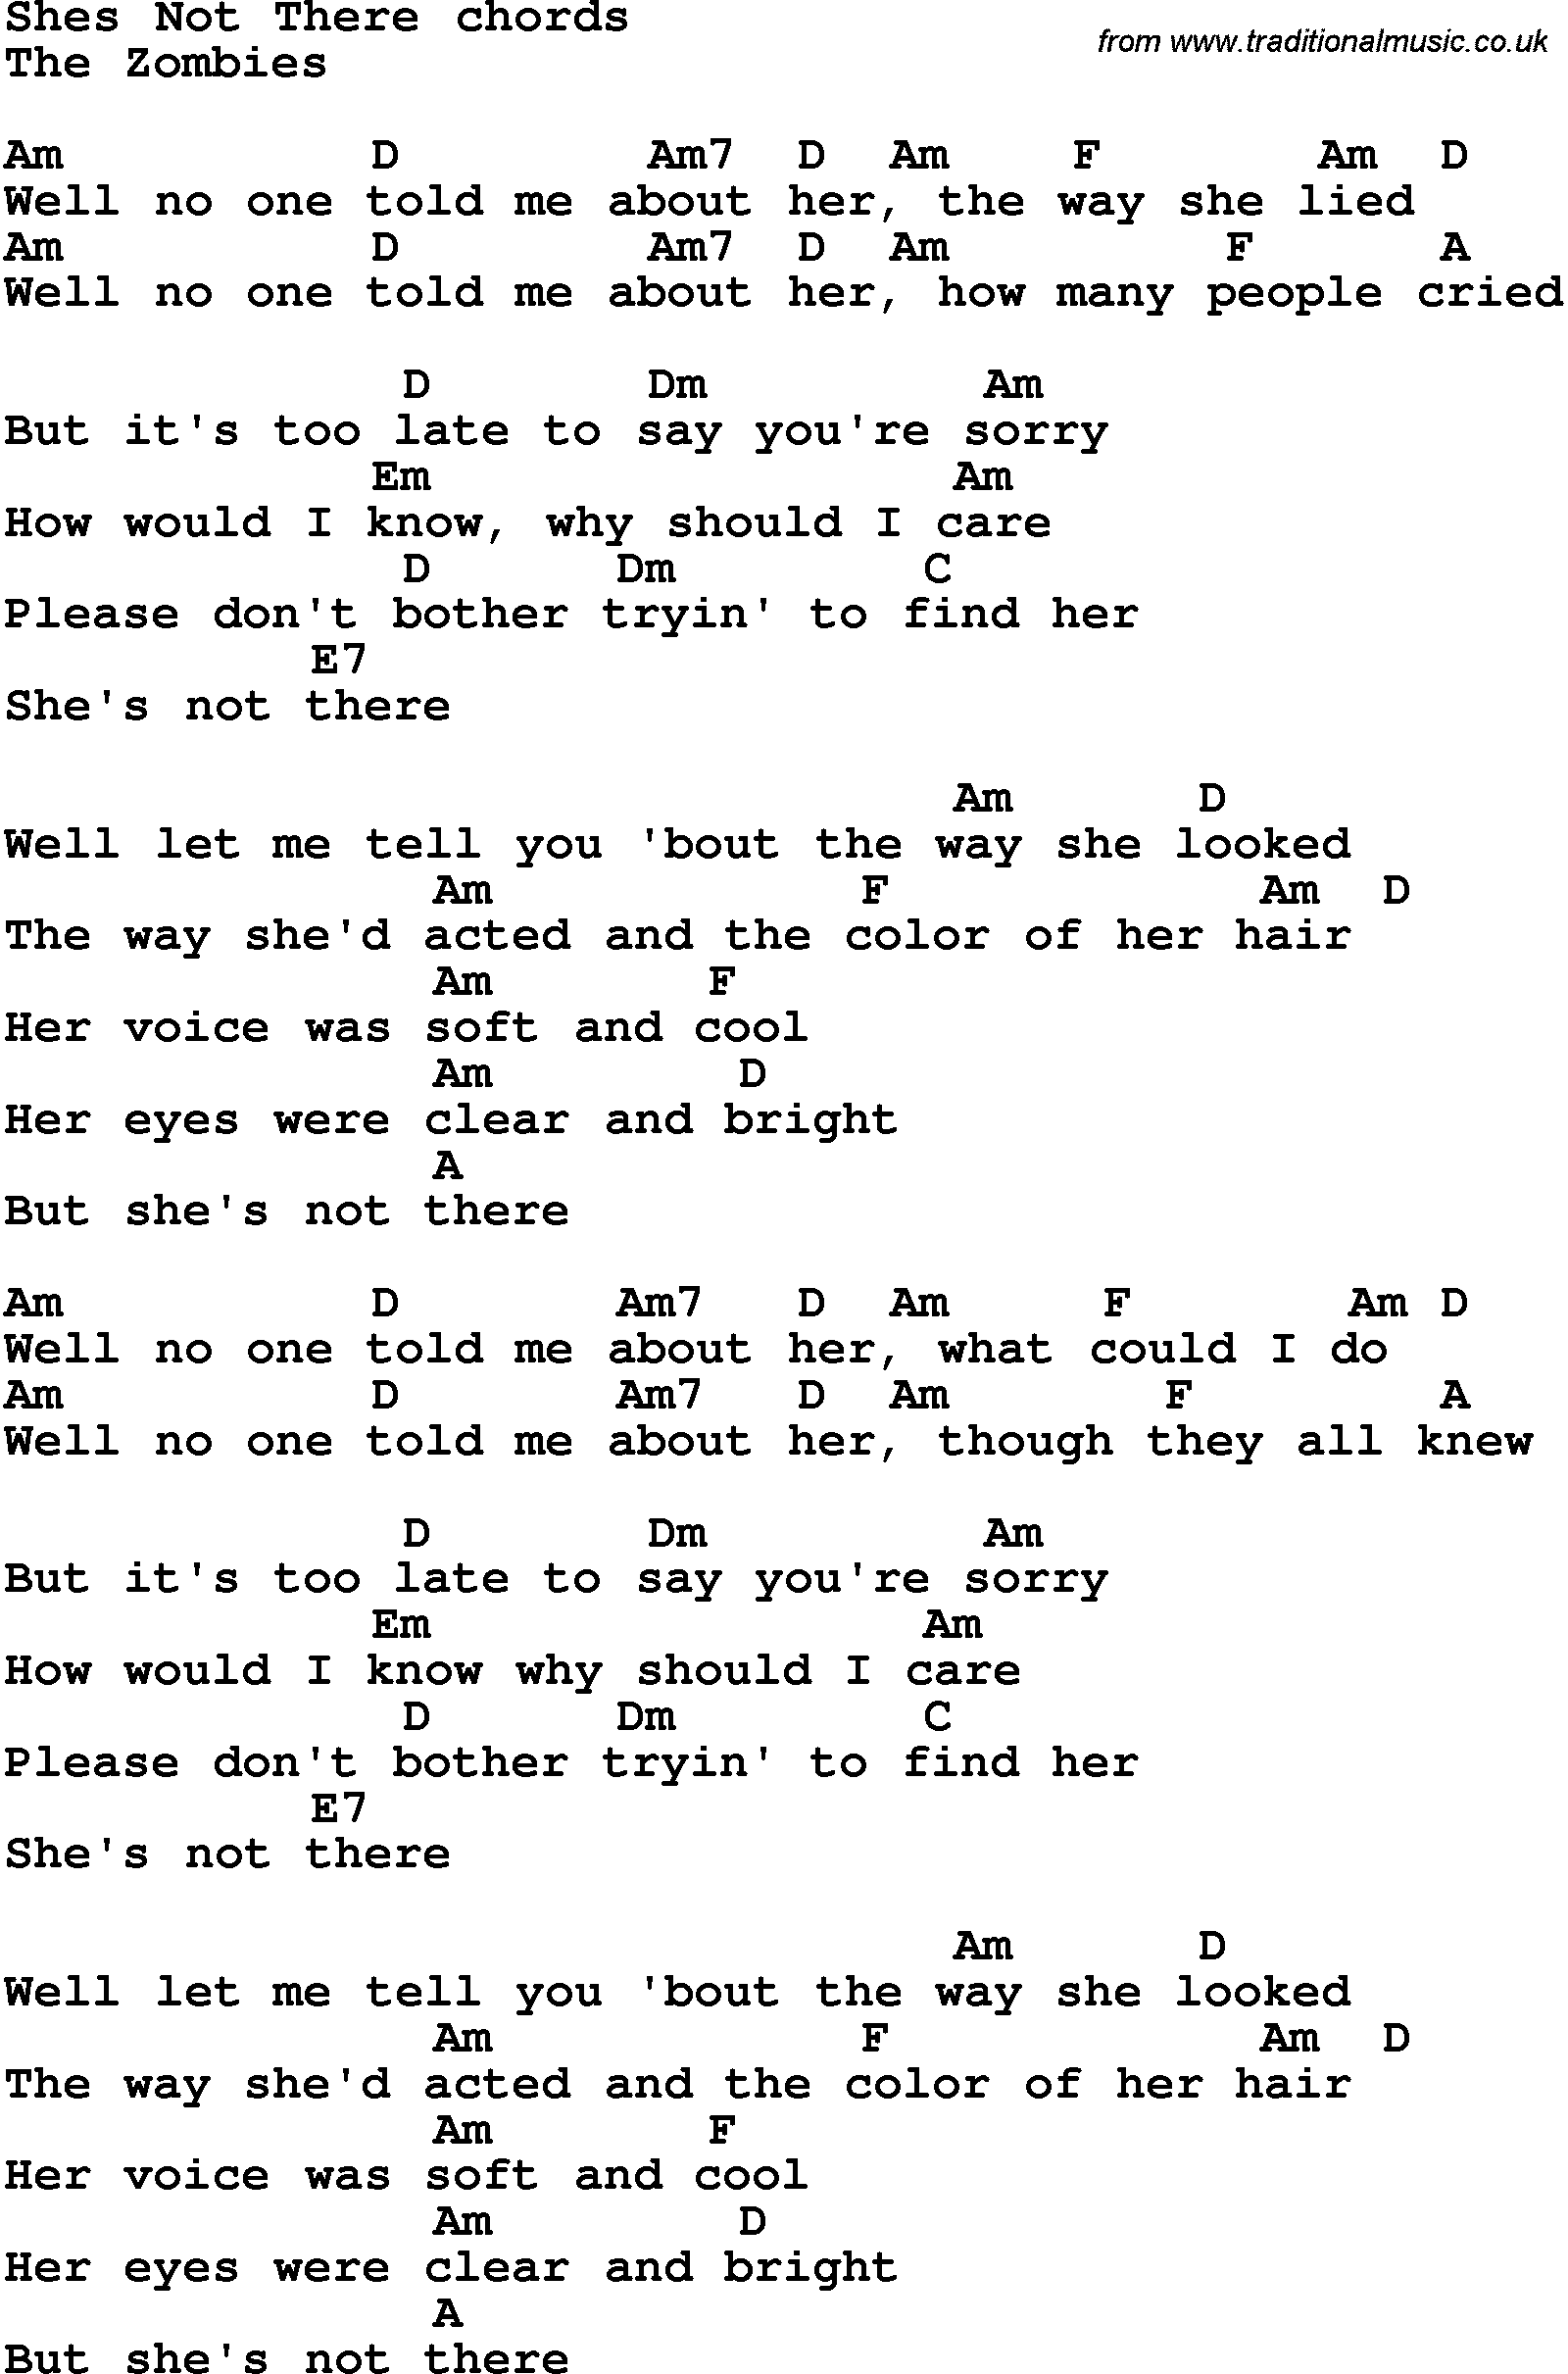 Song Lyrics with guitar chords for She's Not There